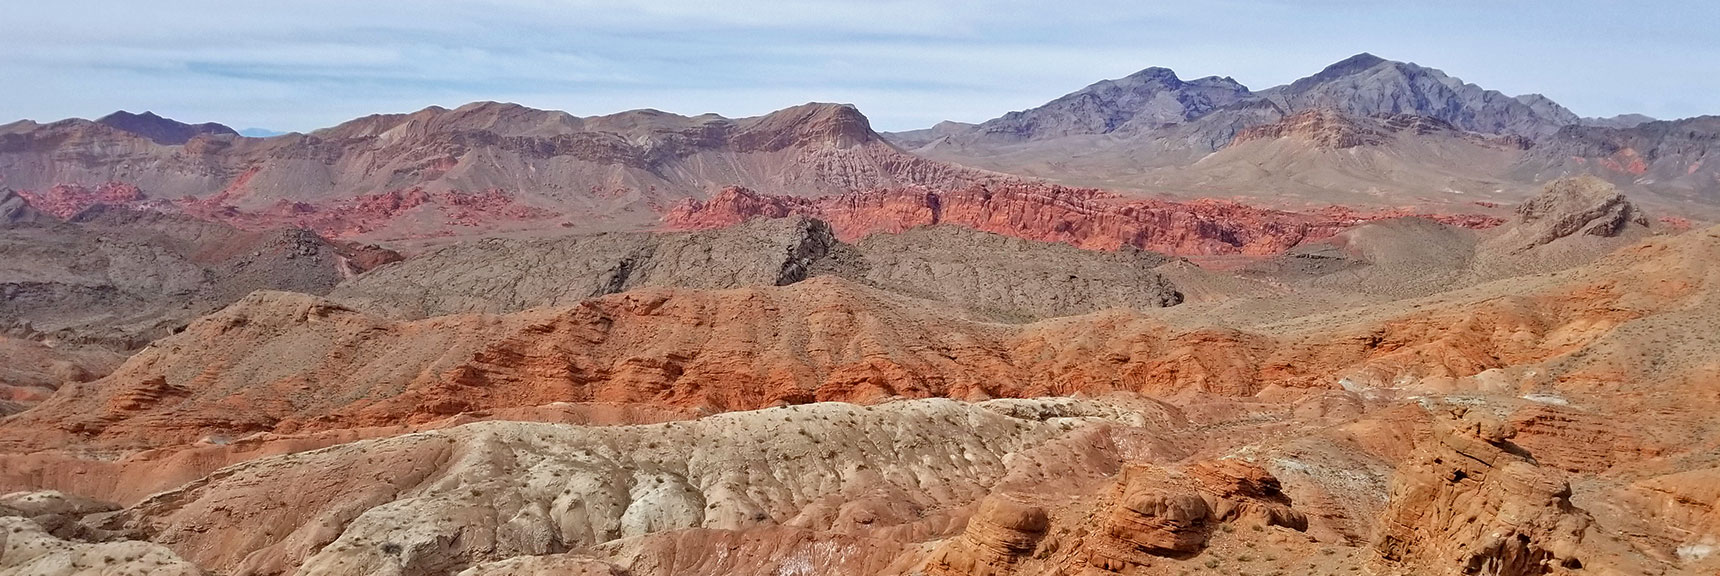 Southeast Corner of Muddy Mountains Viewed from About Mile 18 on Northshore Summit Road in Lake Mead National Park